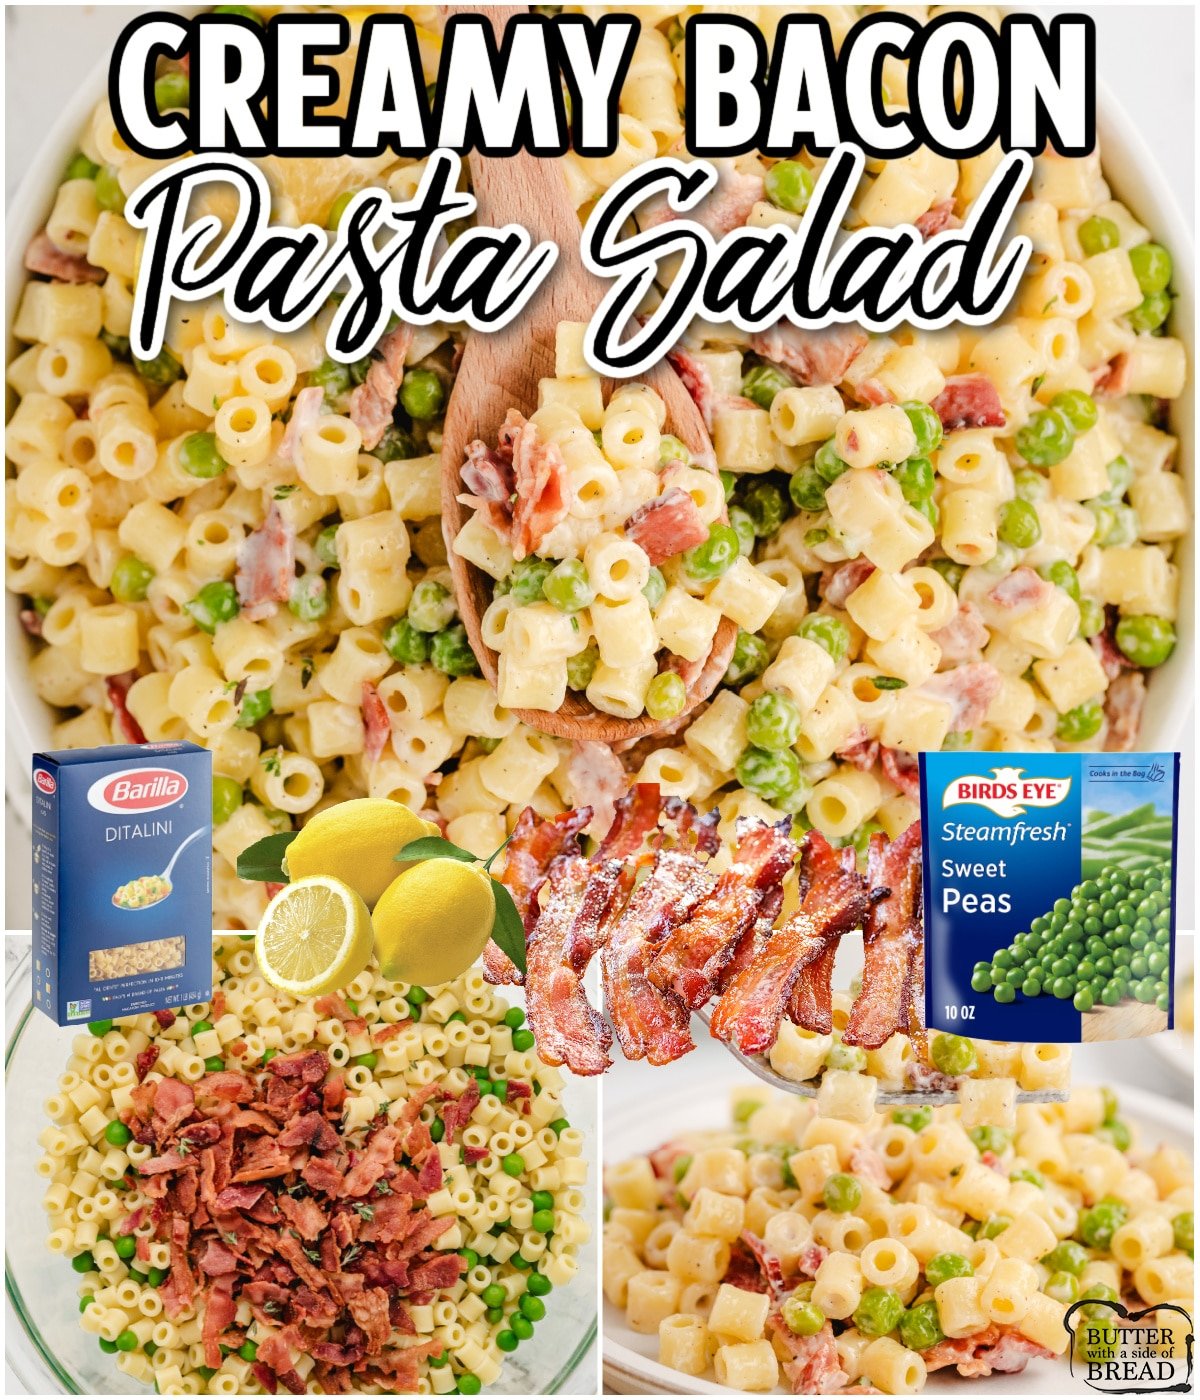 Creamy Bacon Pasta Salad with Lemon Dressing is a light, flavorful salad perfect for a summer cookout! Made easy with bacon, peas, pasta & a refreshing lemon dressing.